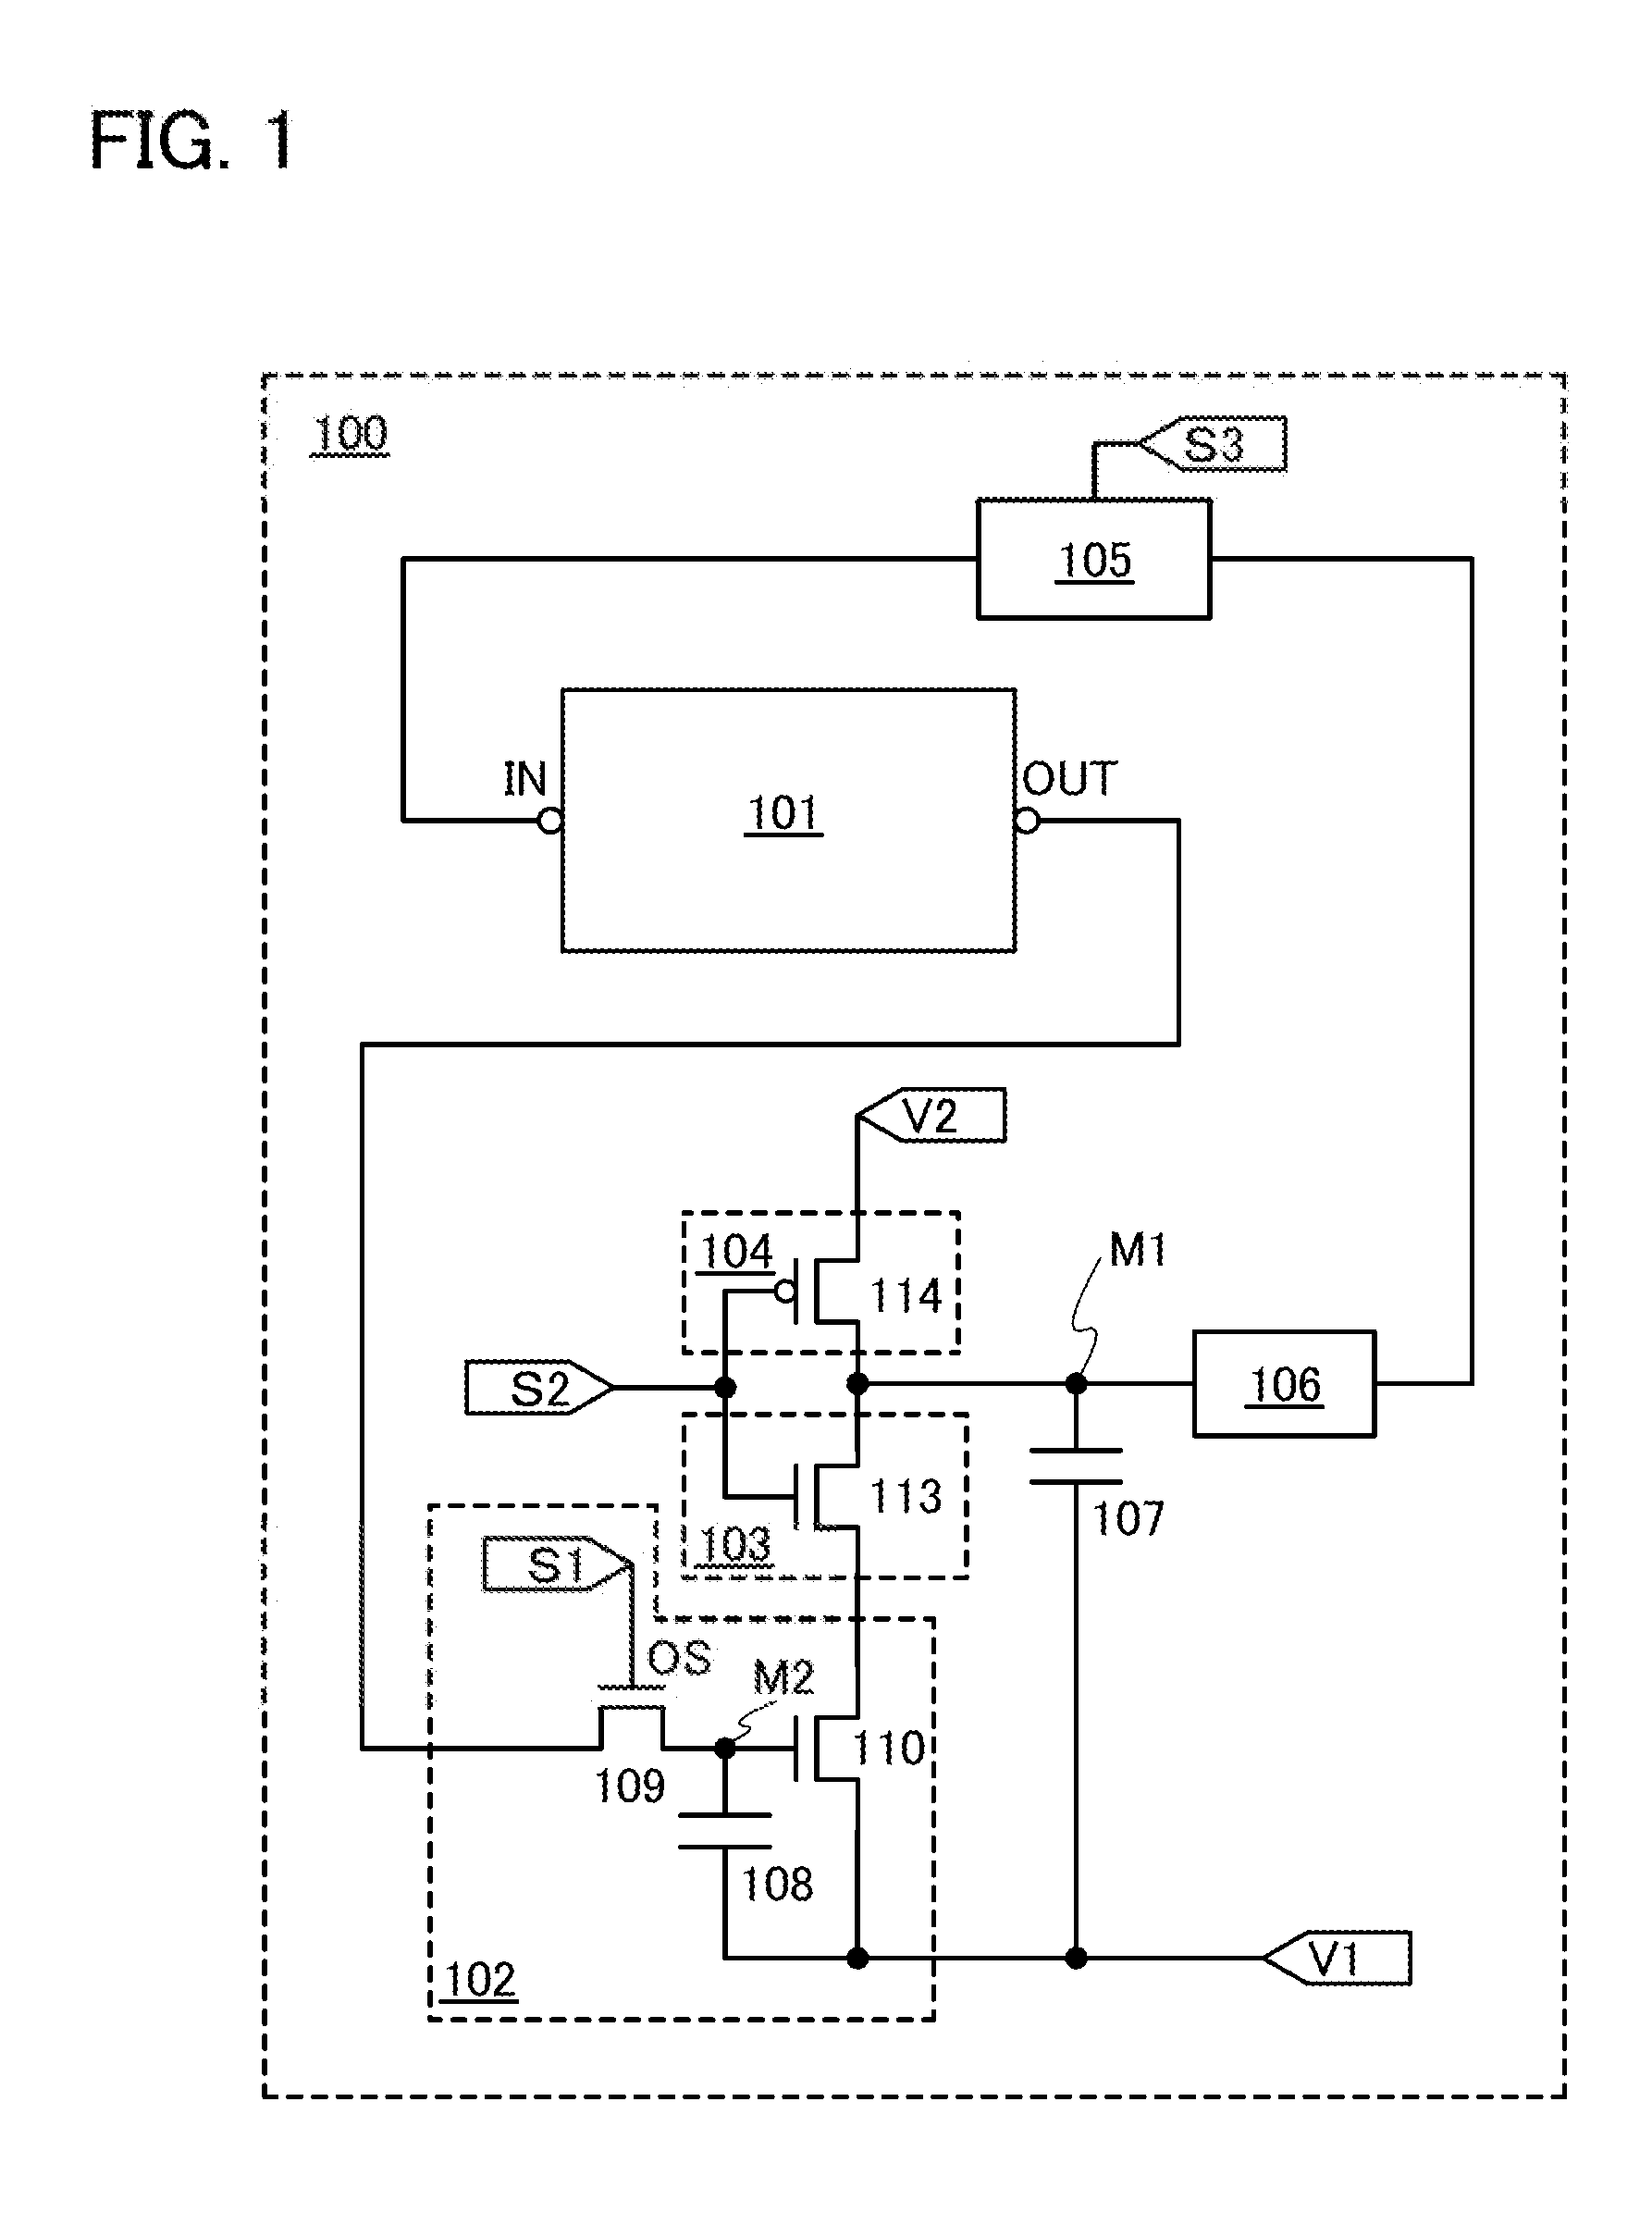 Storage element, storage device, and signal processing circuit